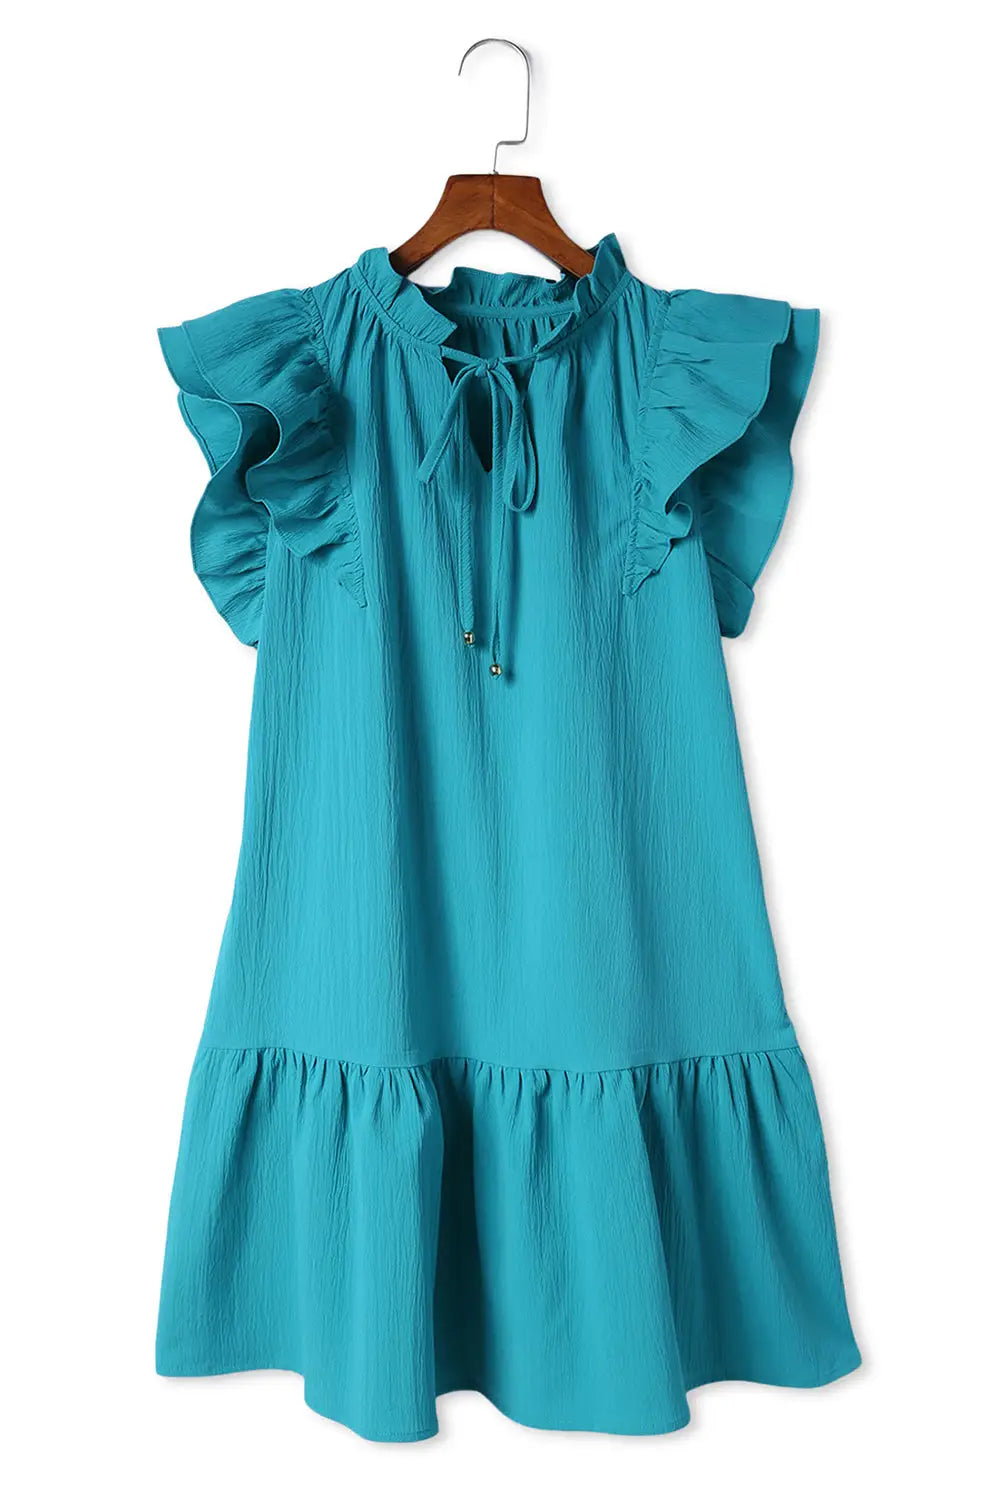 Green tiered ruffled sleeves mini dress with pockets - dresses